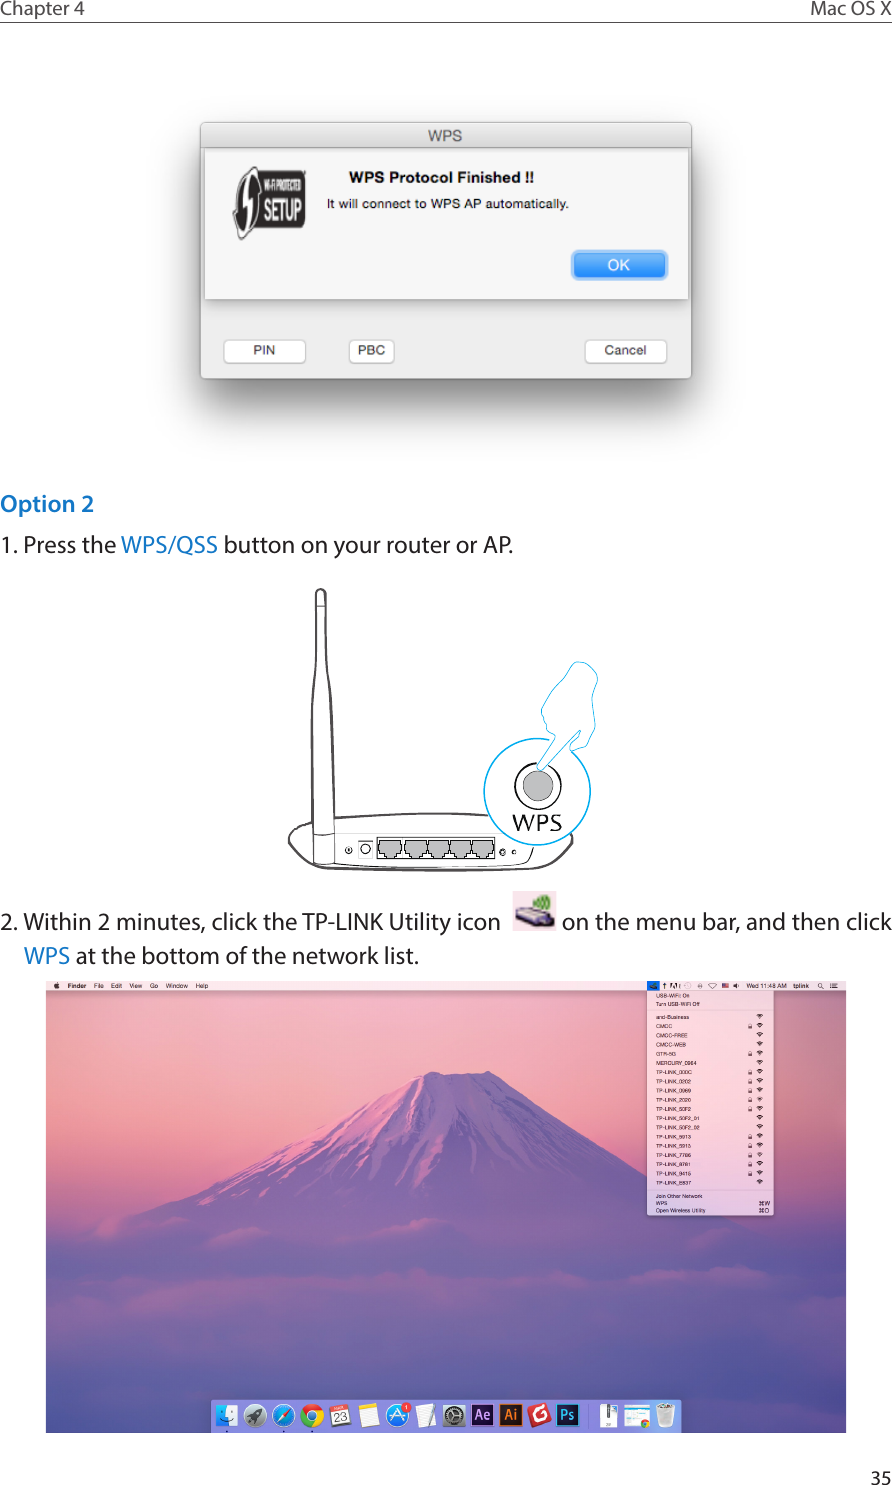 35Chapter 4 Mac OS XOption 21. Press the WPS/QSS button on your router or AP.2. Within 2 minutes, click the TP-LINK Utility icon    on the menu bar, and then click WPS at the bottom of the network list.